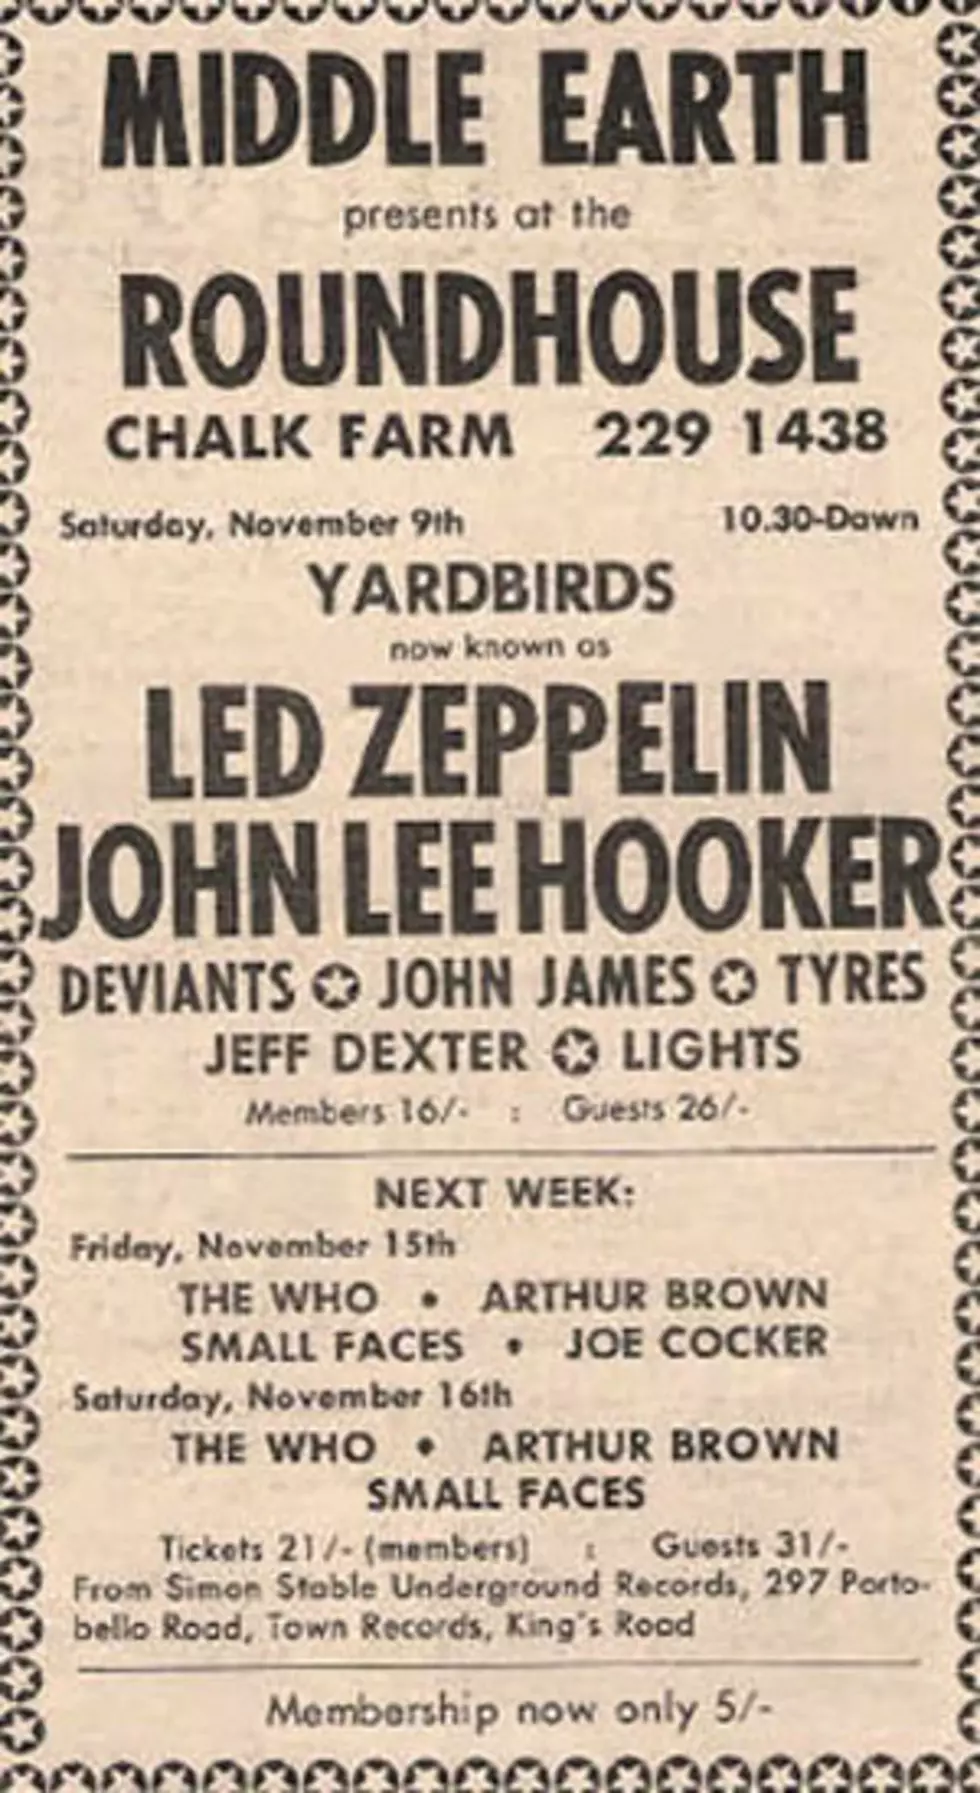 45 Years Ago: Led Zeppelin Make London Debut, Robert Plant Gets Married